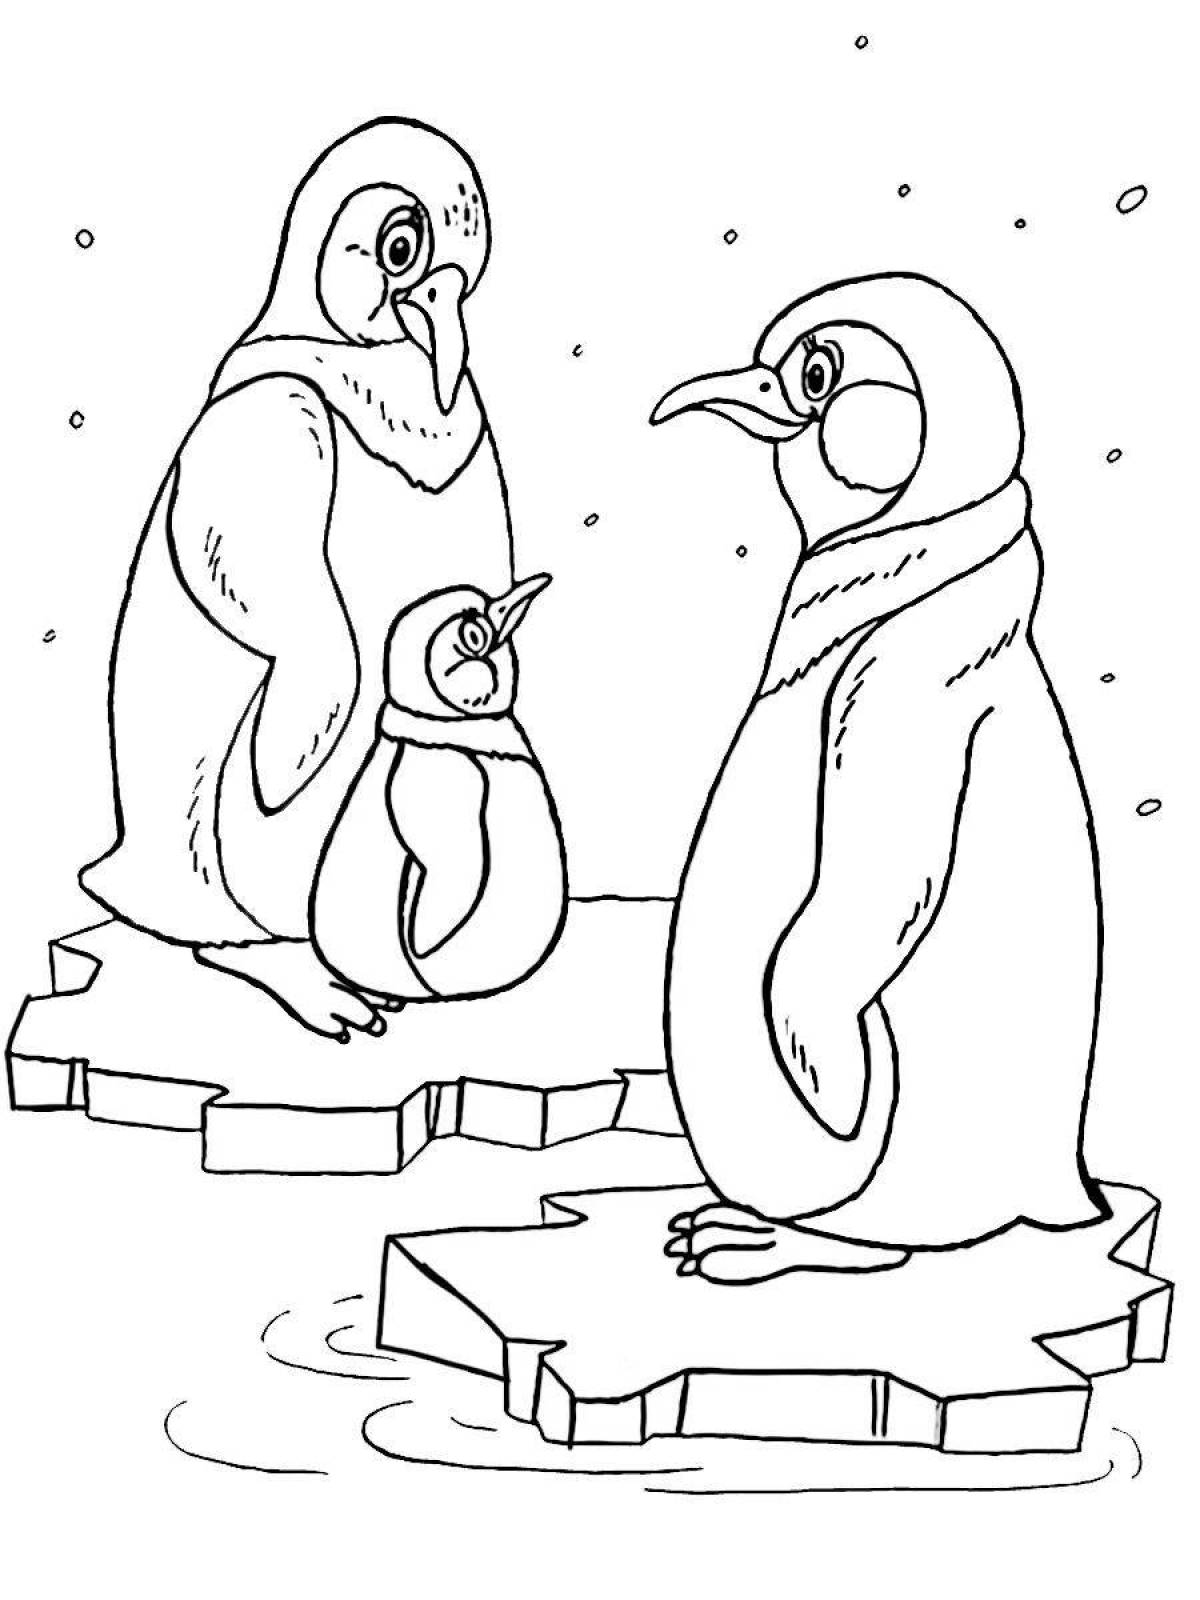 Inviting Antarctica coloring book for children 6-7 years old